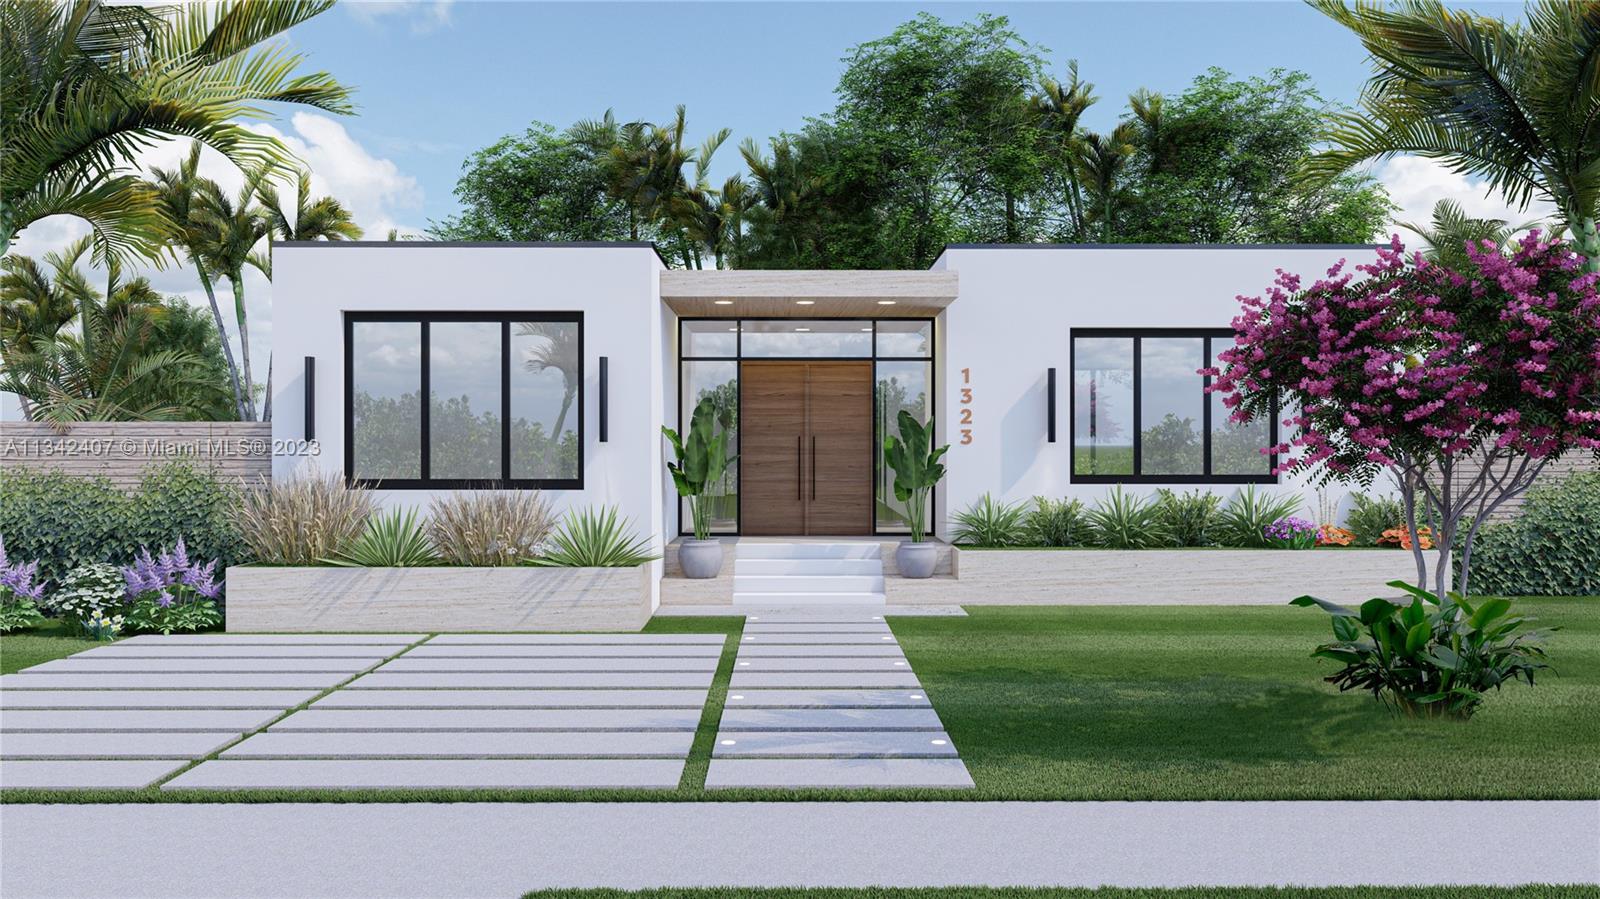 Amazing opportunity to remodel and make this your dream home! Located at desirable Biscayne Point: private, gated community in the heart of Miami Beach. Walking distance to the beach, only minutes to Bal Harbour Shops and all Miami Beach has to offer. The existing home on 6,600 SF lot is originally from 1949, interior has been partially demolished already. The property is sold with plans to build a spectacular and modern, 4 bedroom, 3 1/2 bathroom home. The new design boasts airy 10' ceilings, lots of glass doors, large open plan kitchen and dining room facing the pool and backyard deck, large living room, large master bedroom with walk-in closet facing the backyard. Don't miss this opportunity to own and remodel to your own taste in the best location in Miami Beach!